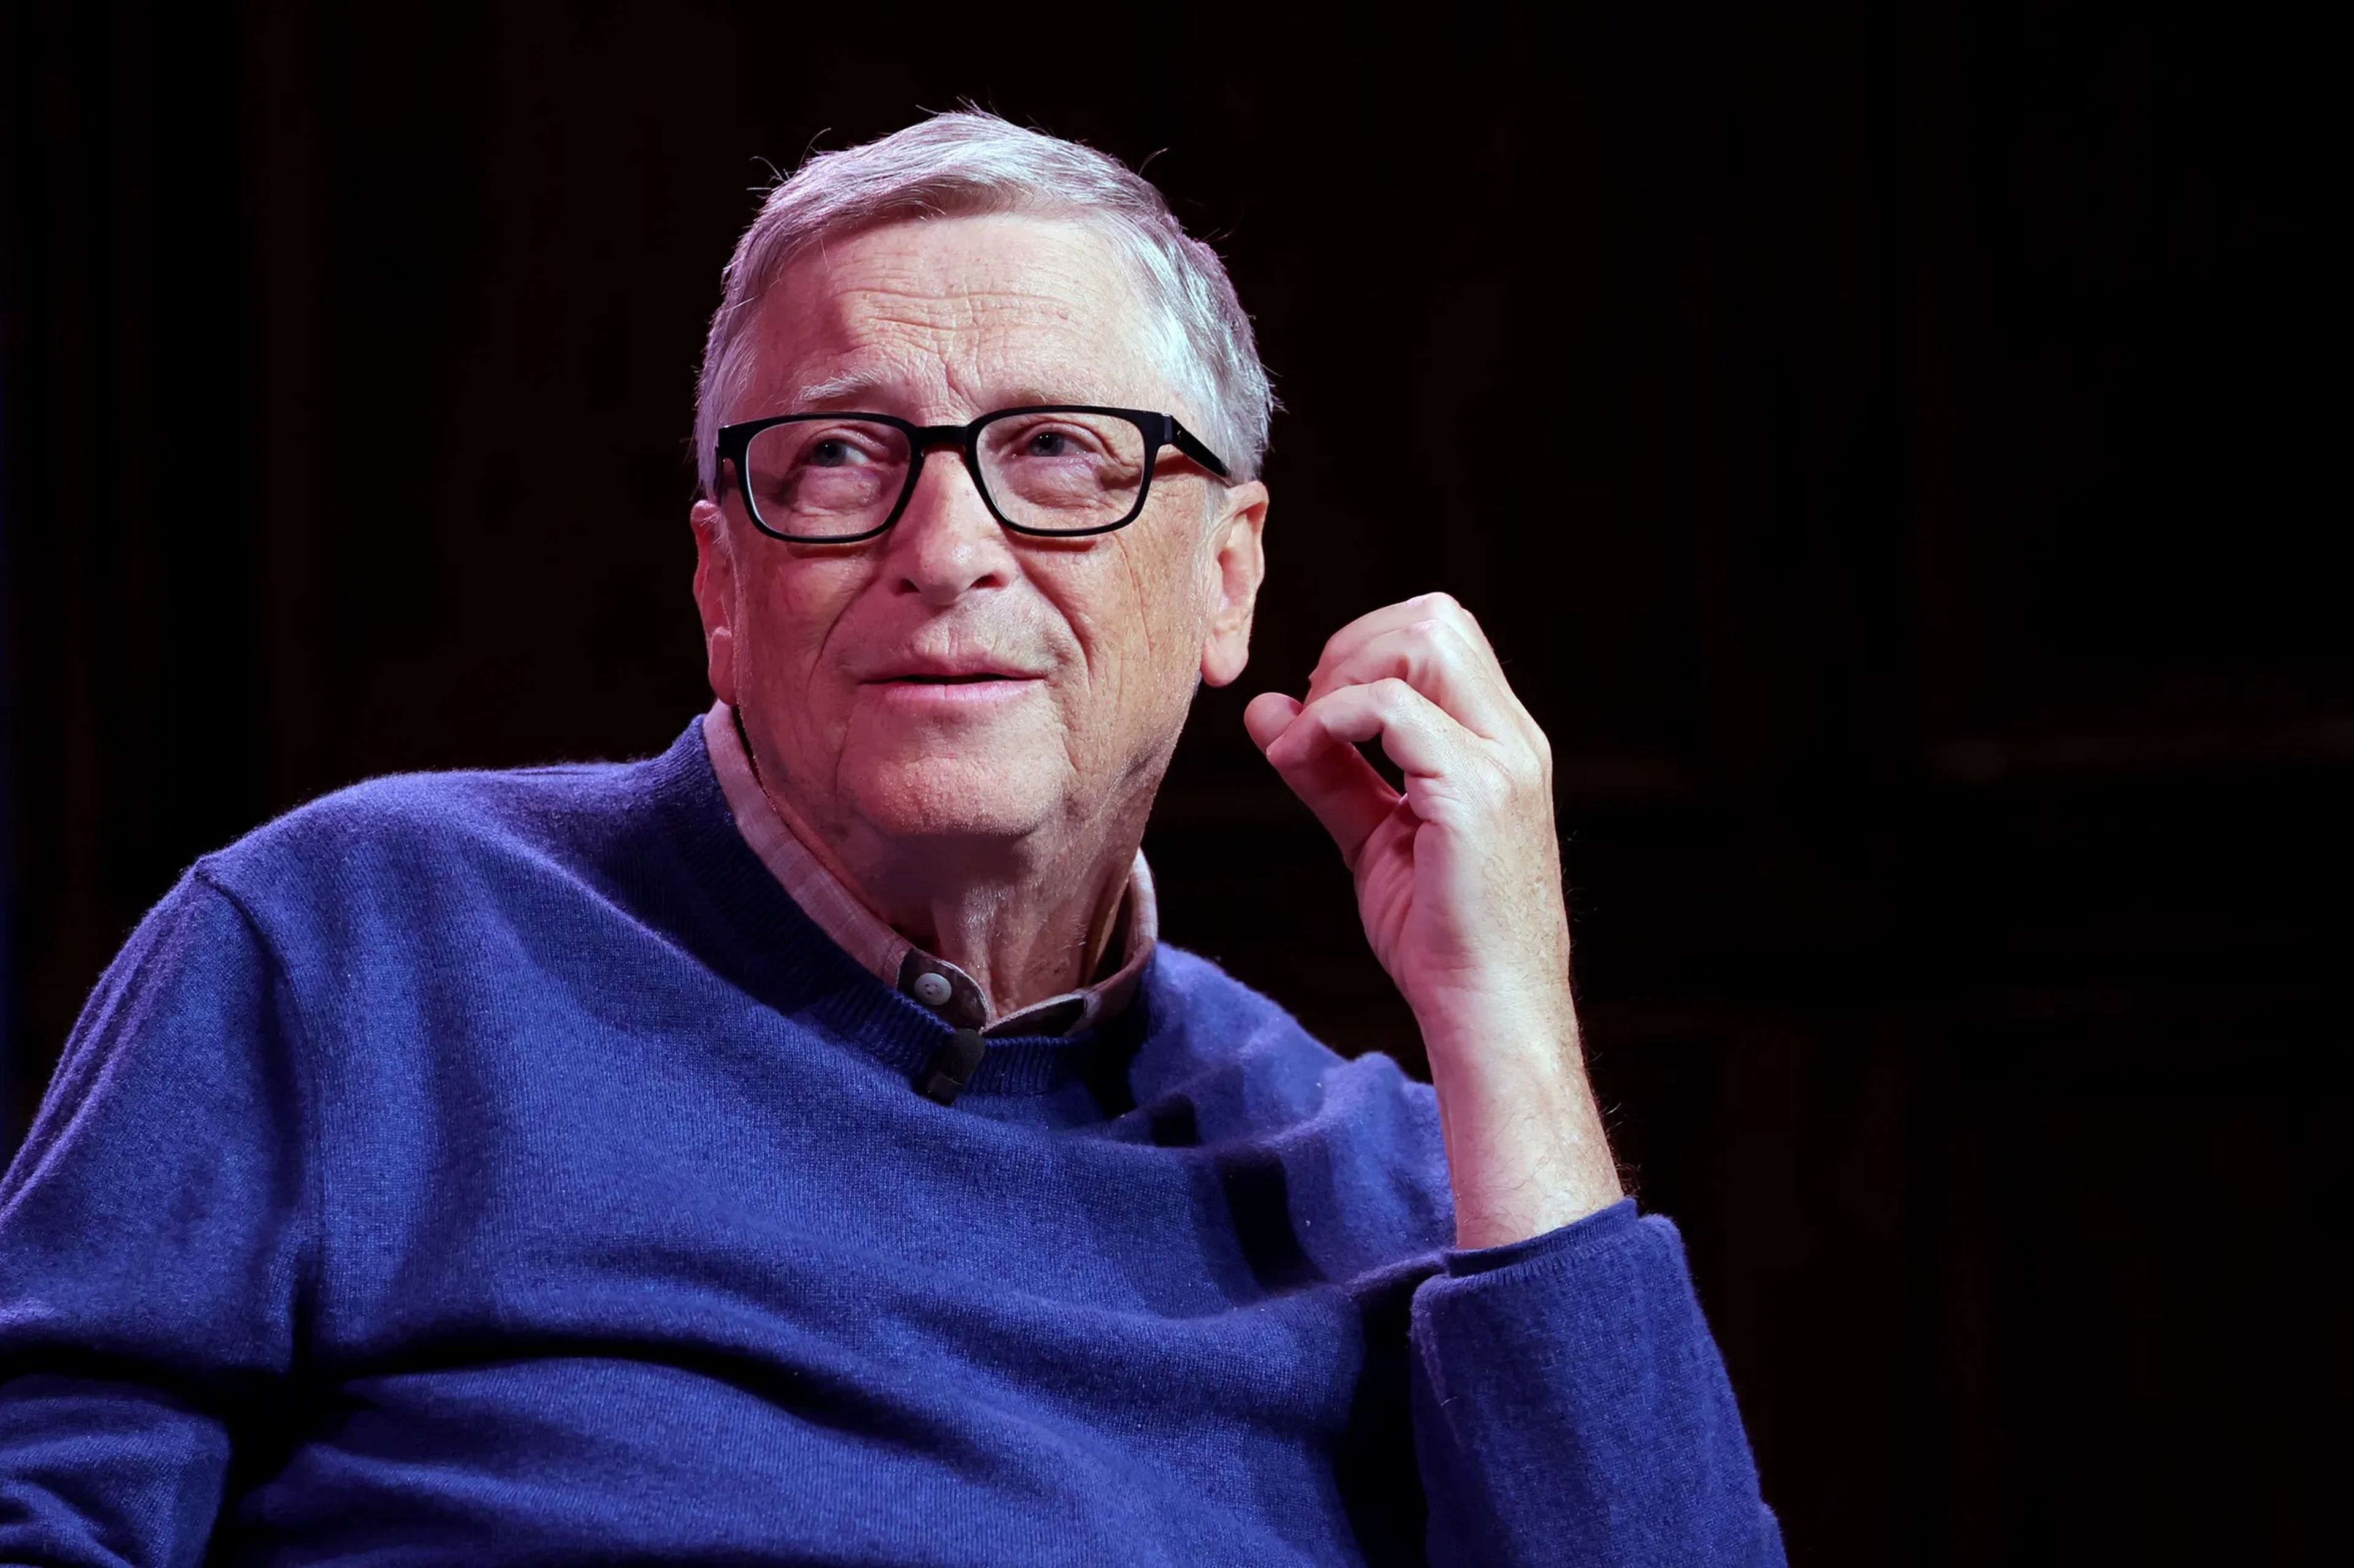 Bill Gates discusses his new book 'How To Prevent The Next Pandemic' onstage at 92Y on May 03, 2022 in New York City. (Photo by Michael Loccisano/Getty Images)